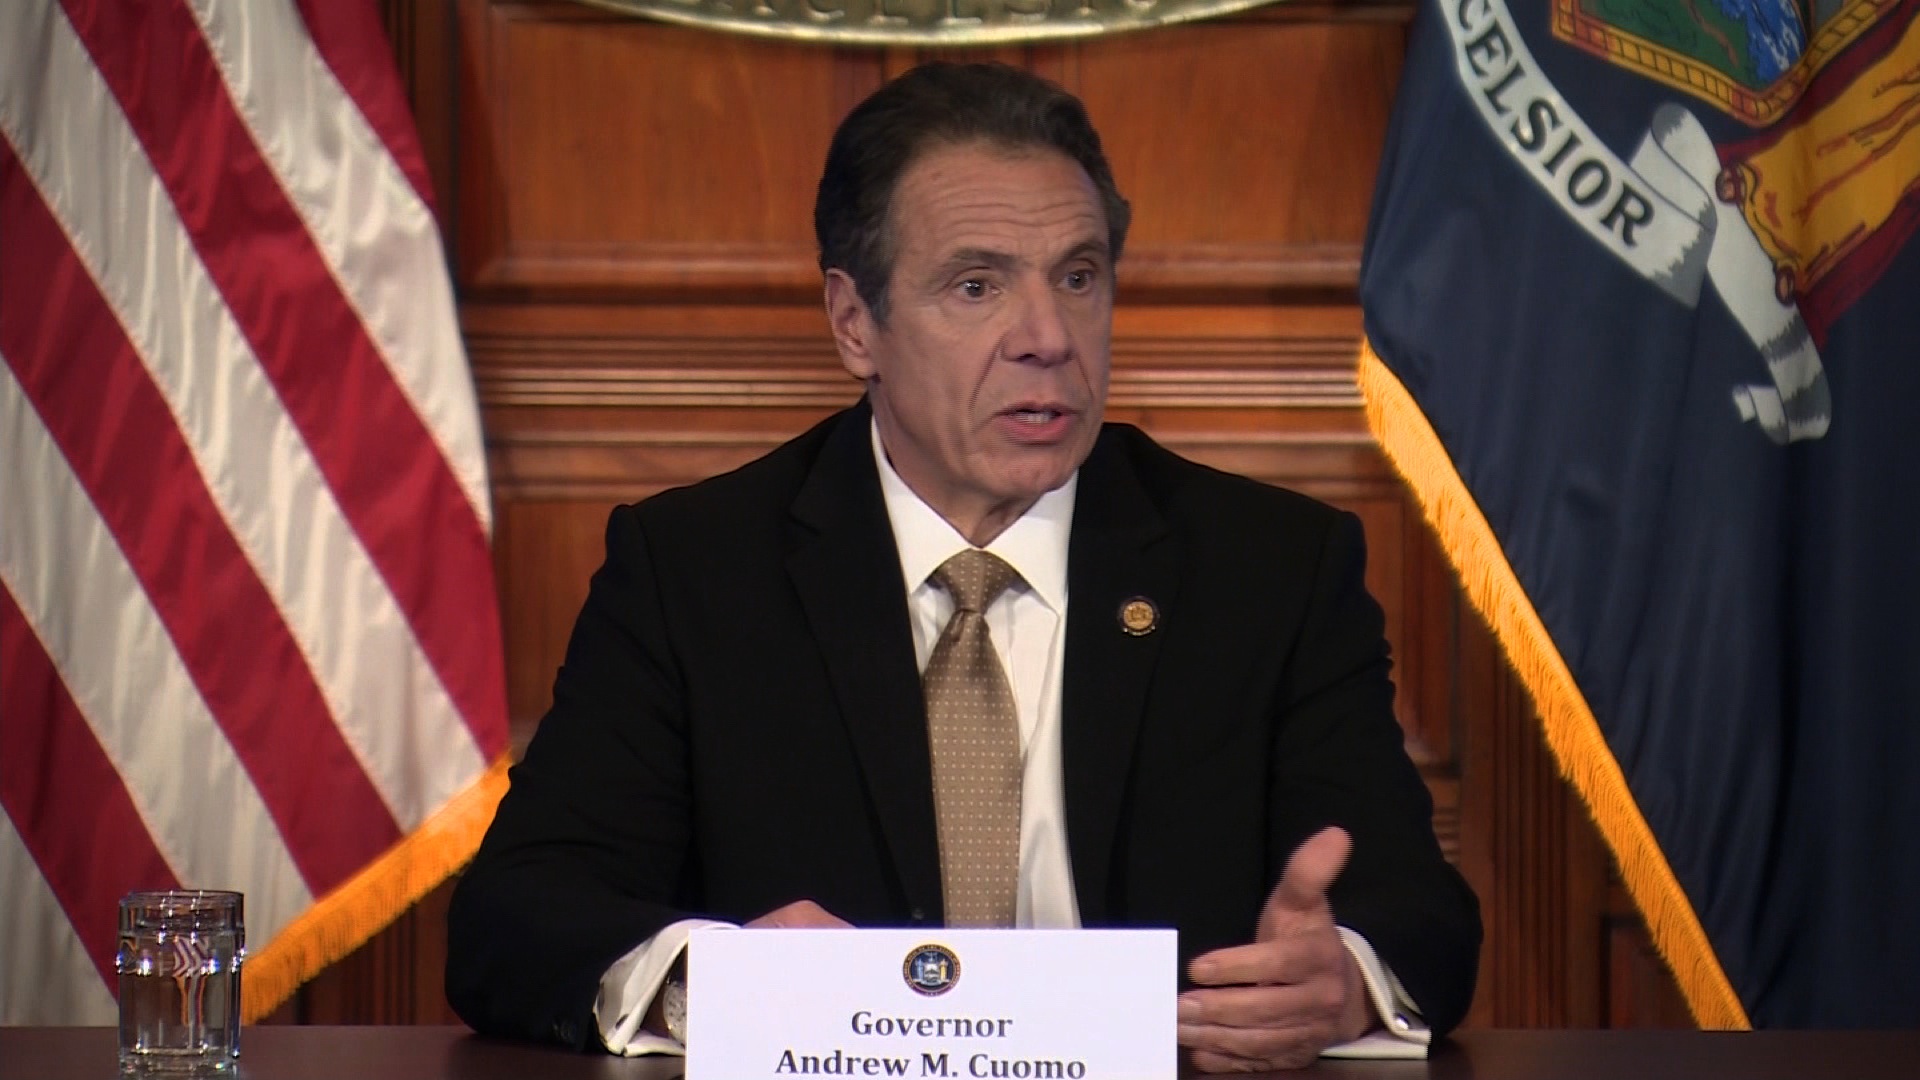 New York Governor Andrew Cuomo speaks during a press conference at the State Capitol in Albany, New York, on April 22